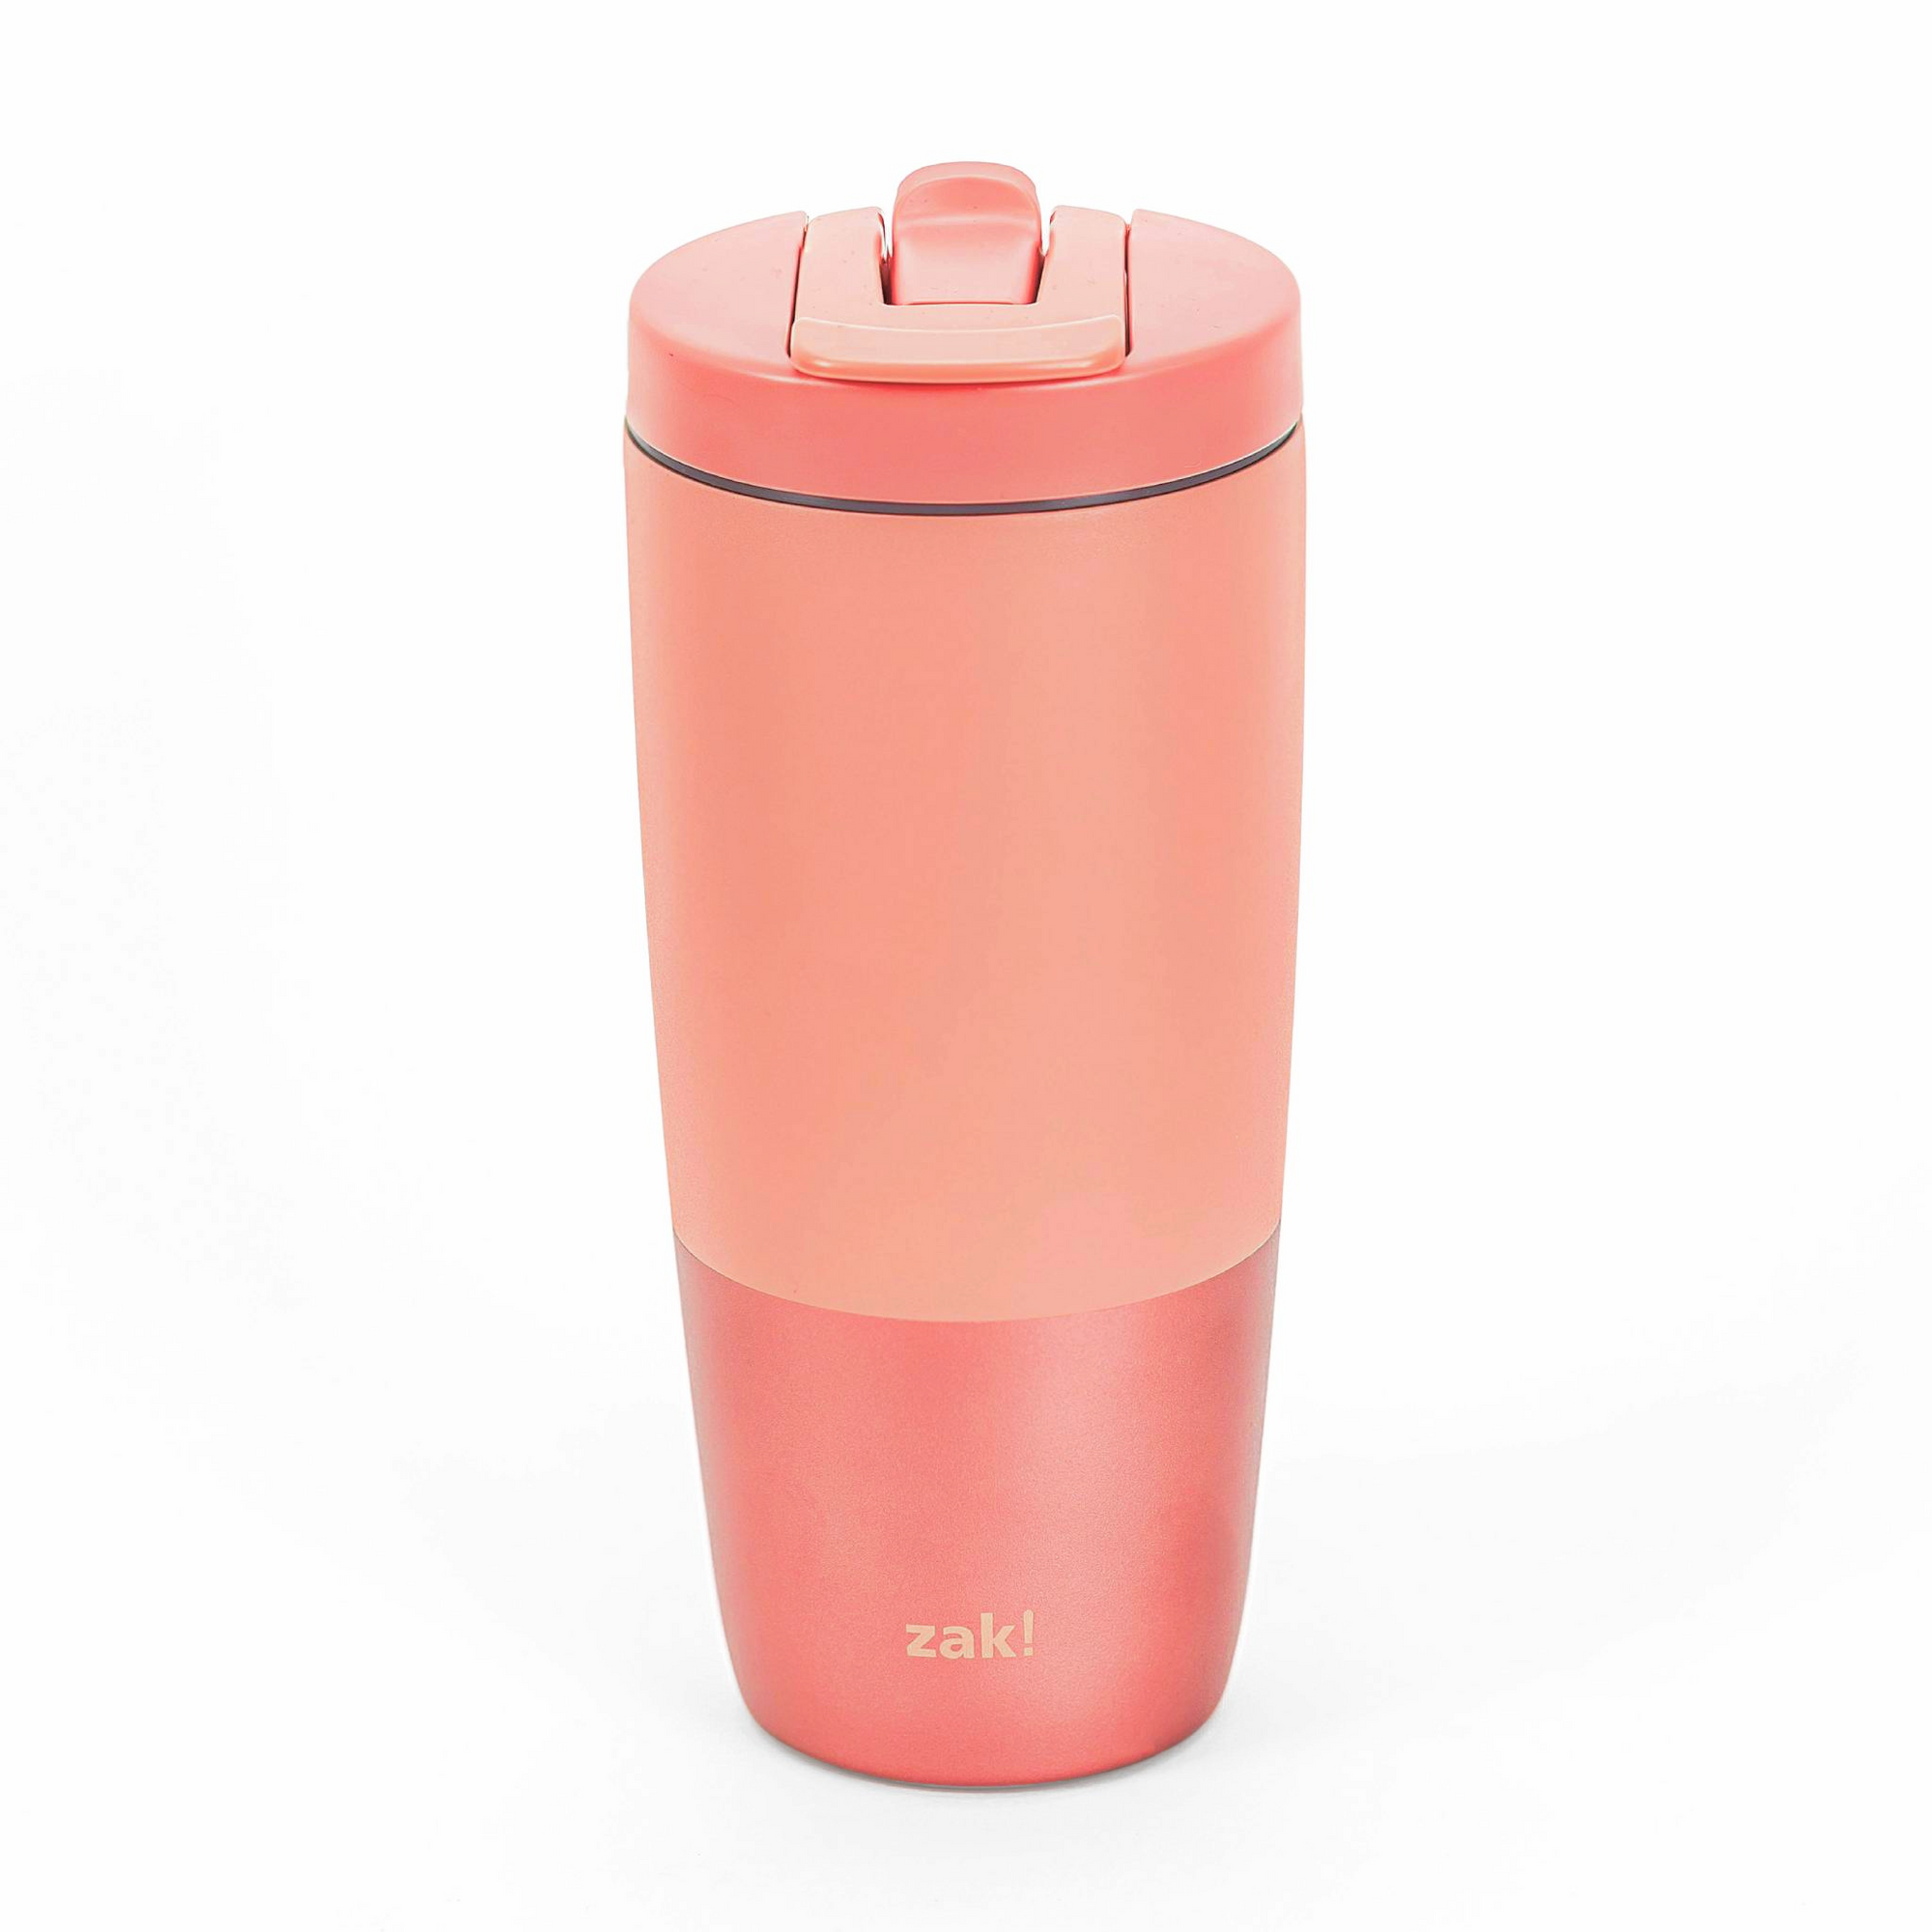 Sutton Insulated Stainless Steel Tumbler with 2-in-1 Straw and Sip Lid - Coral Blush, 30 Ounces